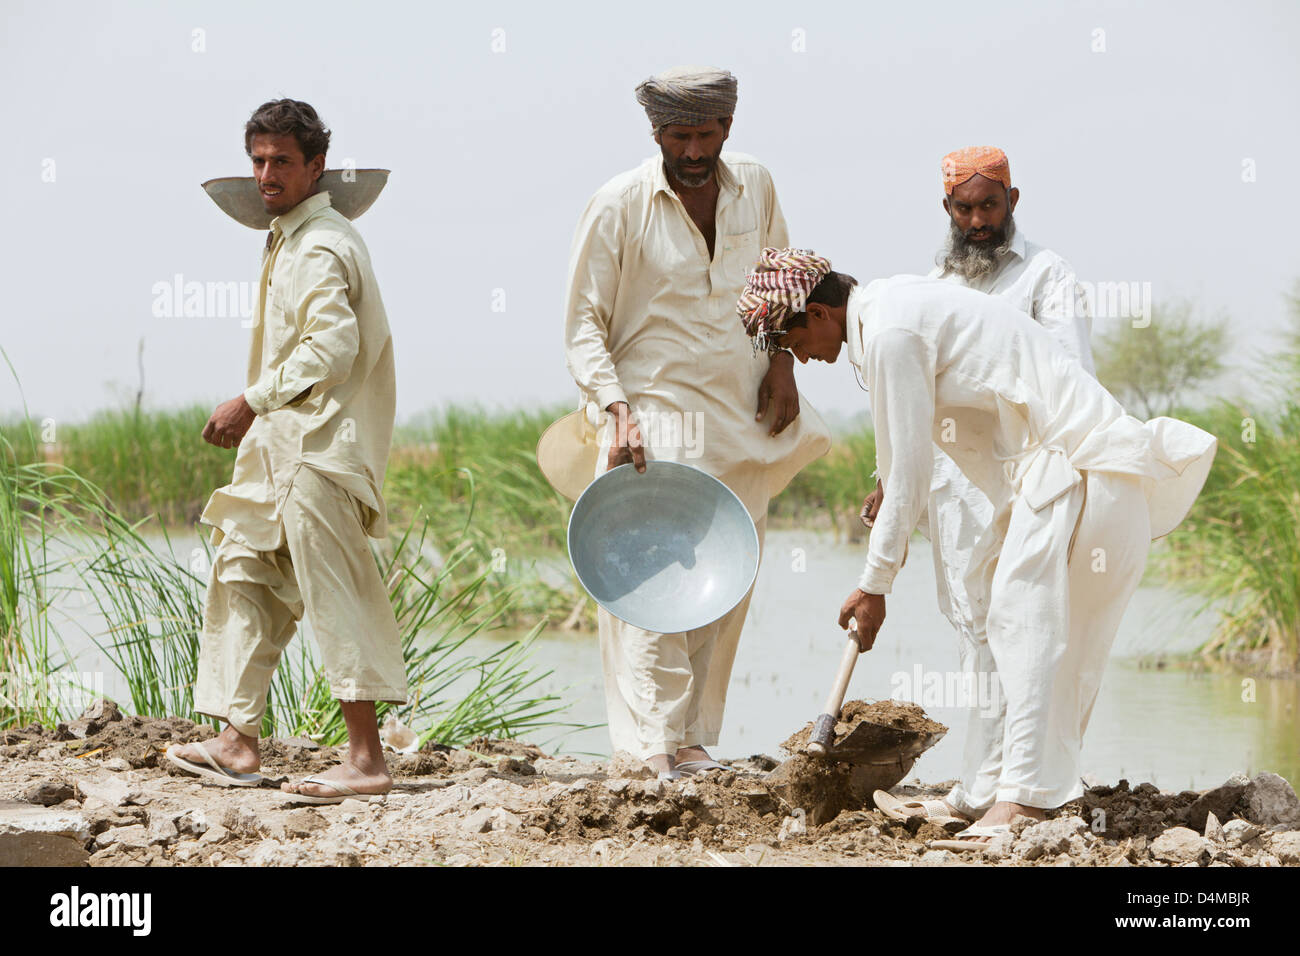 Hamzomahar, Pakistan, cleaning a sewer Stock Photo